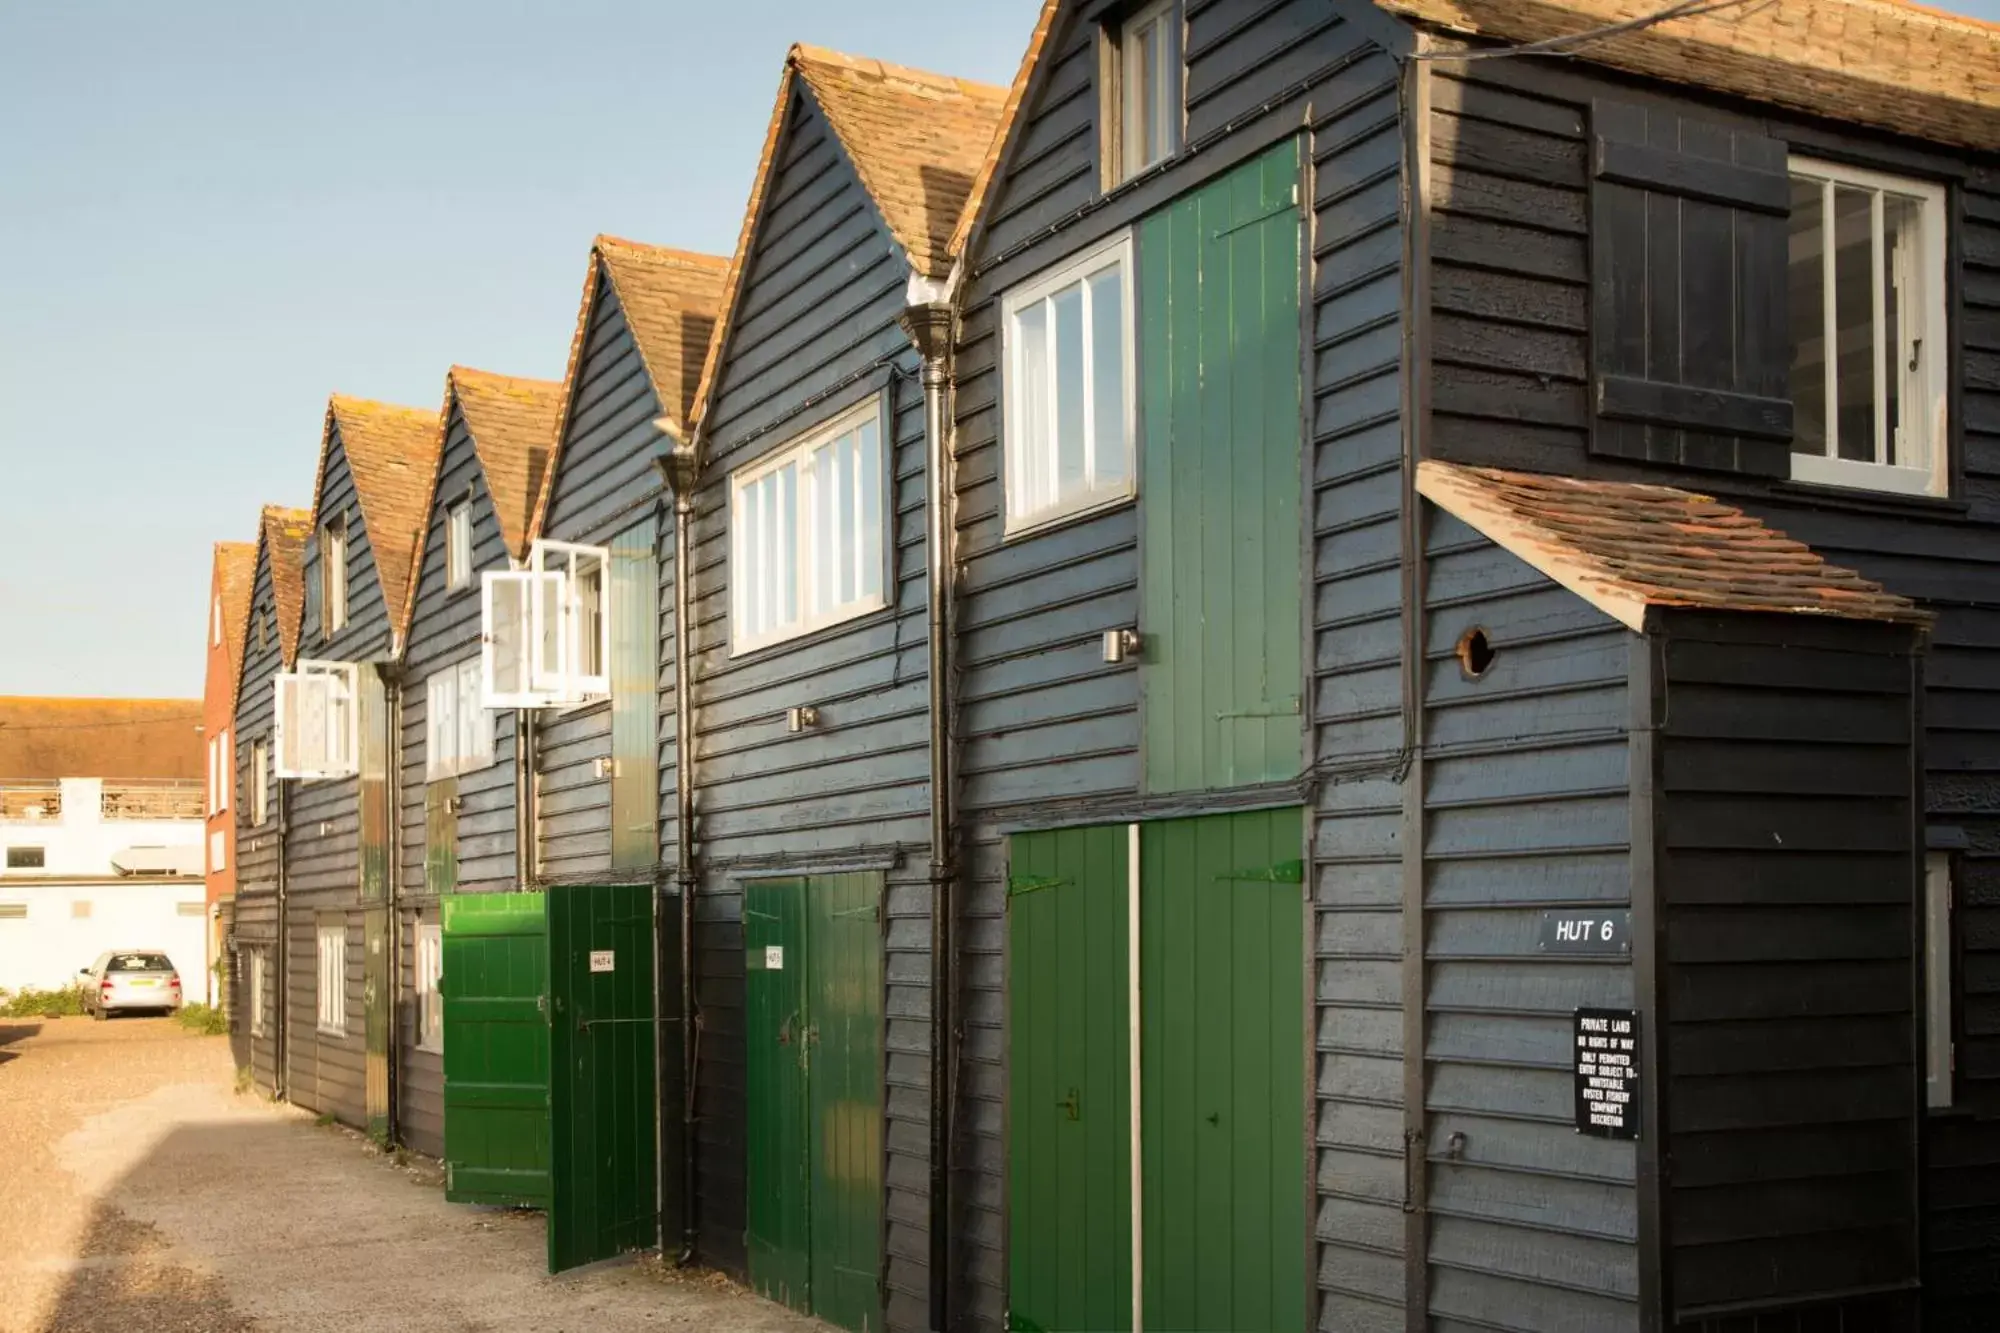 Property Building in Whitstable Fisherman's Huts